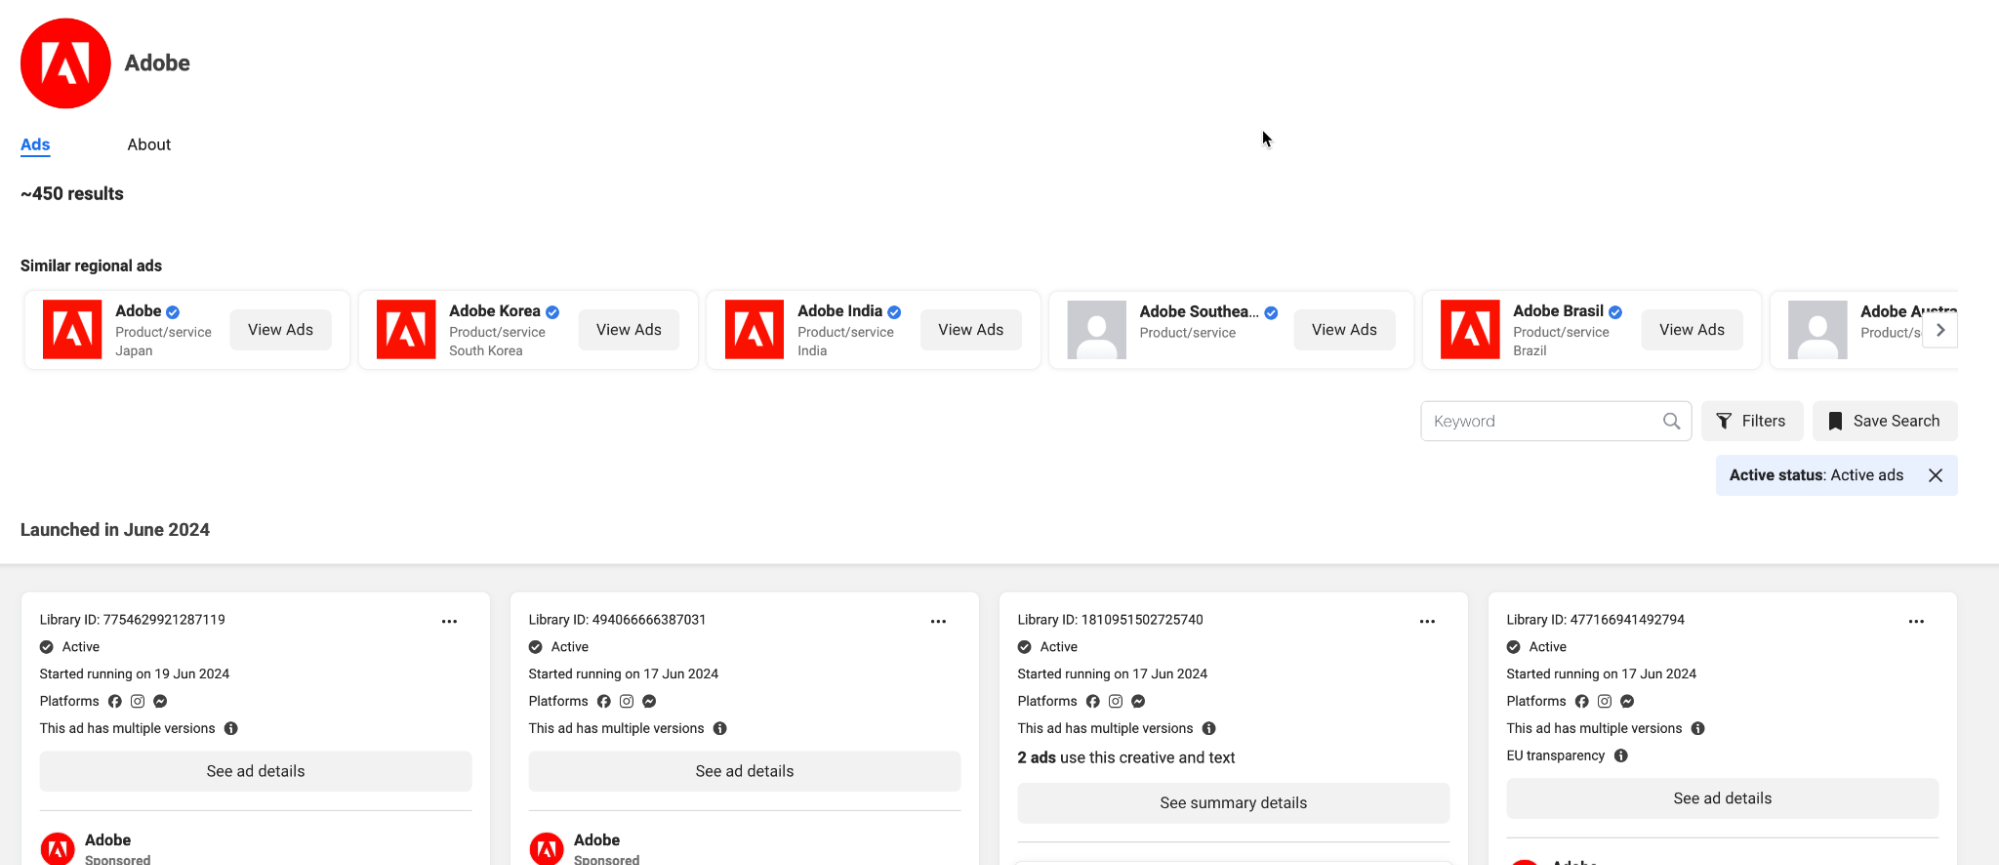 Adobe for SaaS